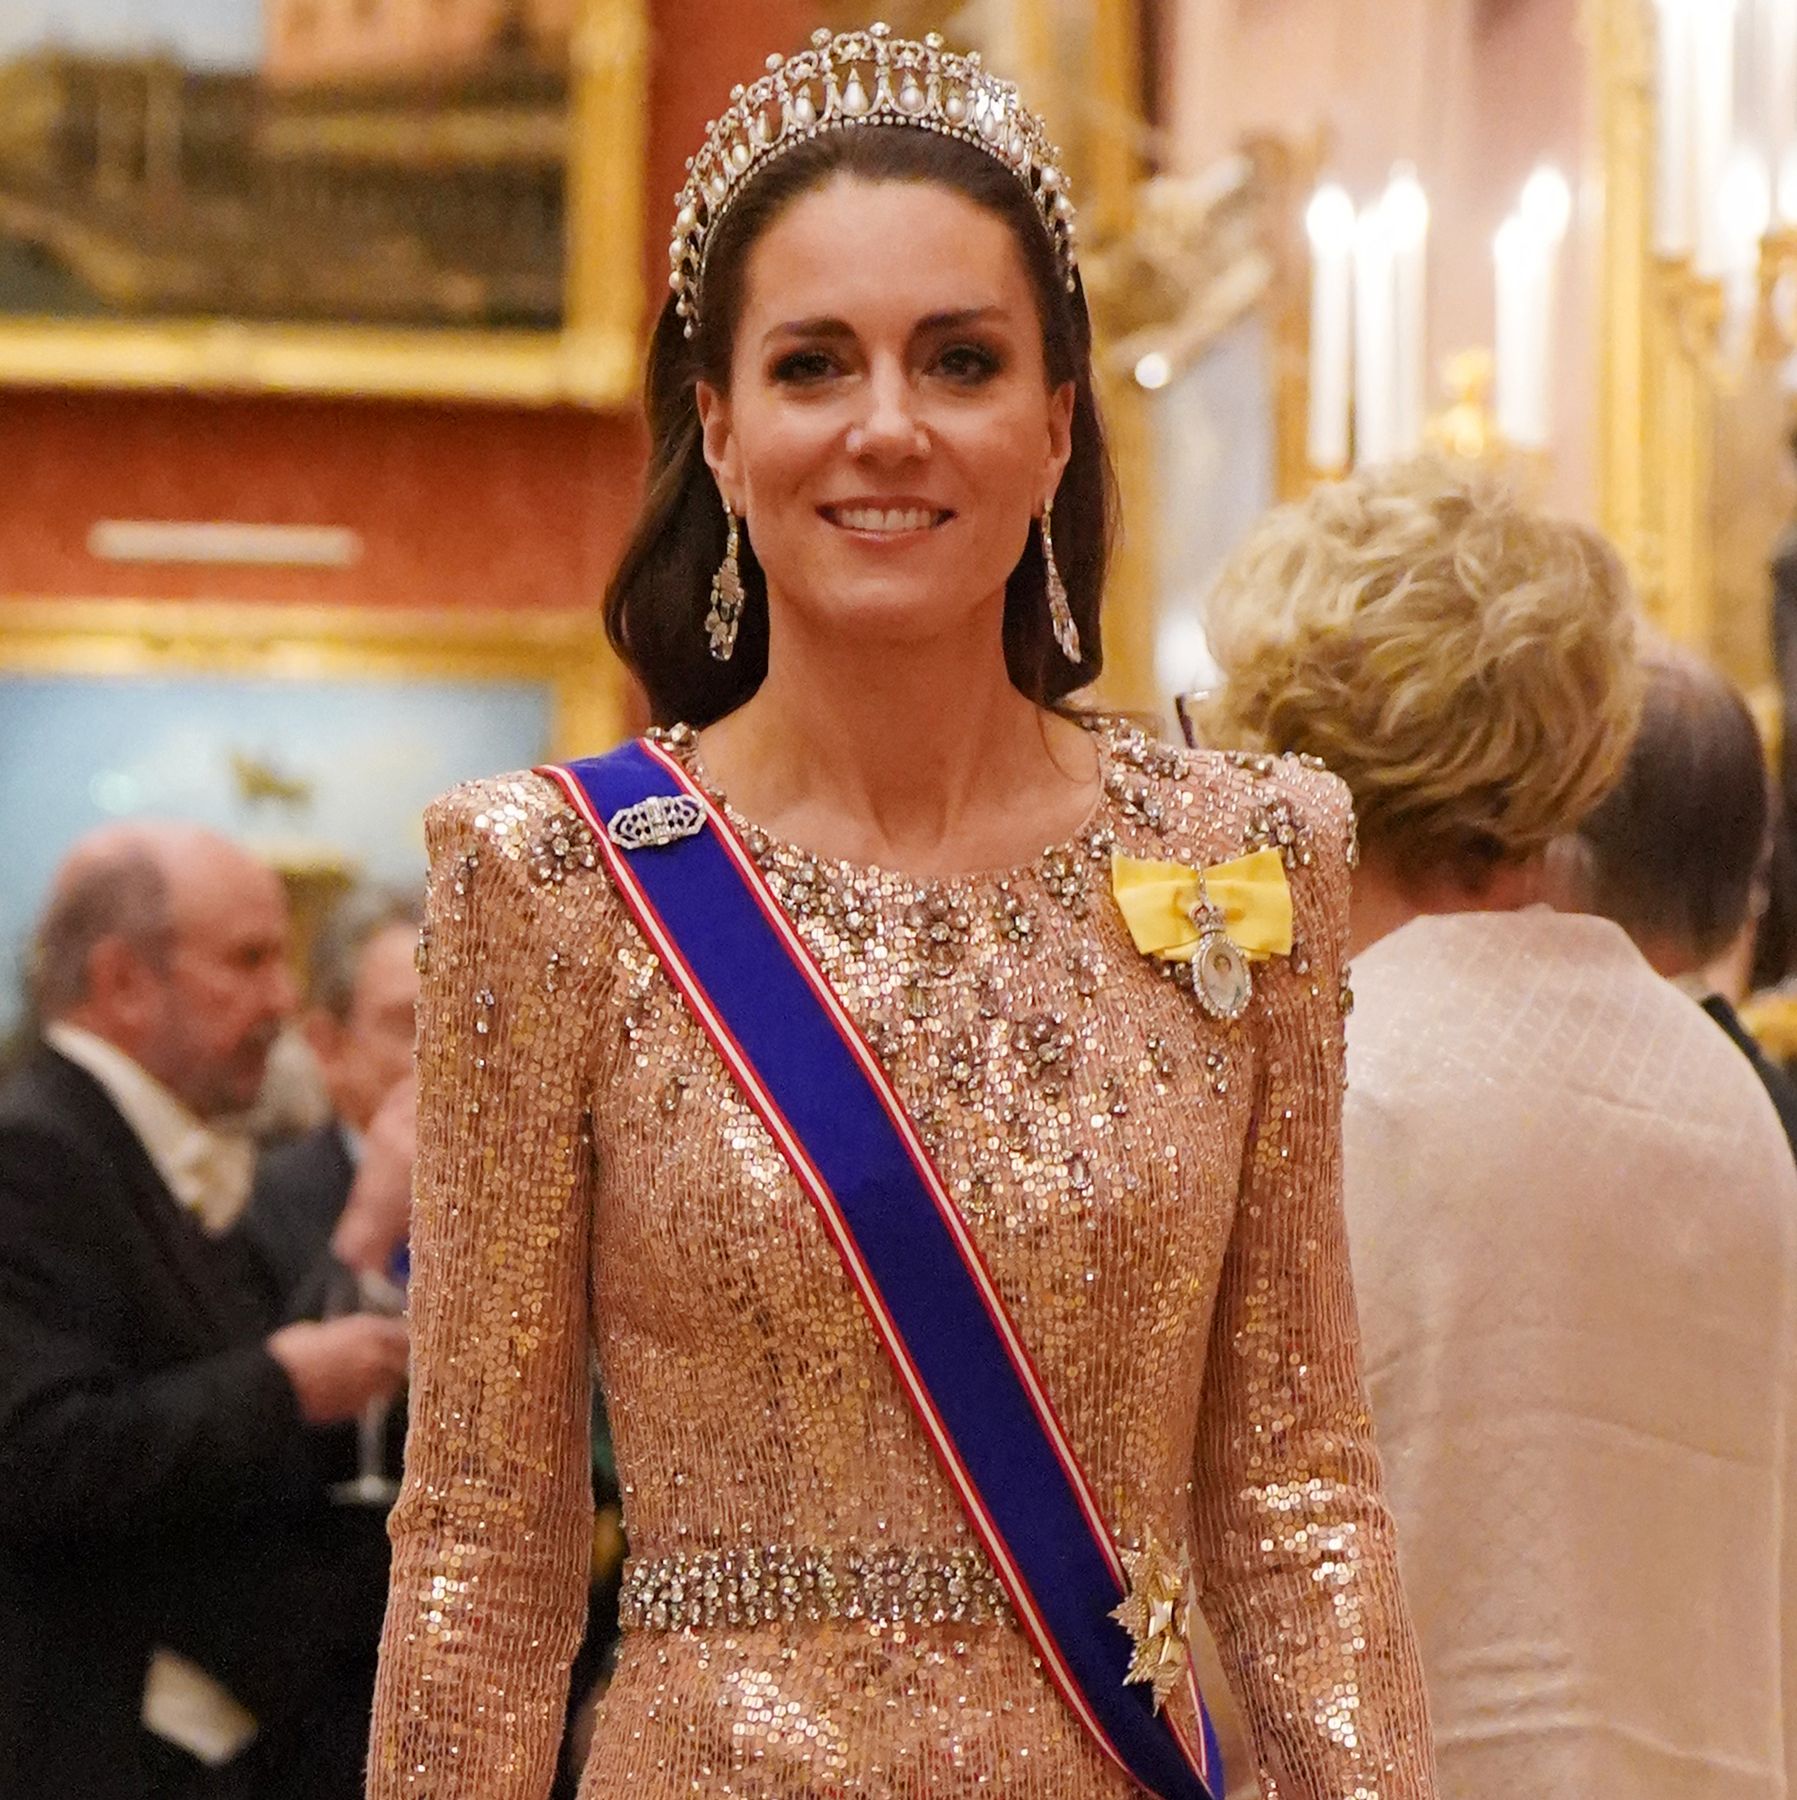 Princess Kate Is Pretty in Pink While Re-wearing Her Go-To Tiara and a Sequined Gown